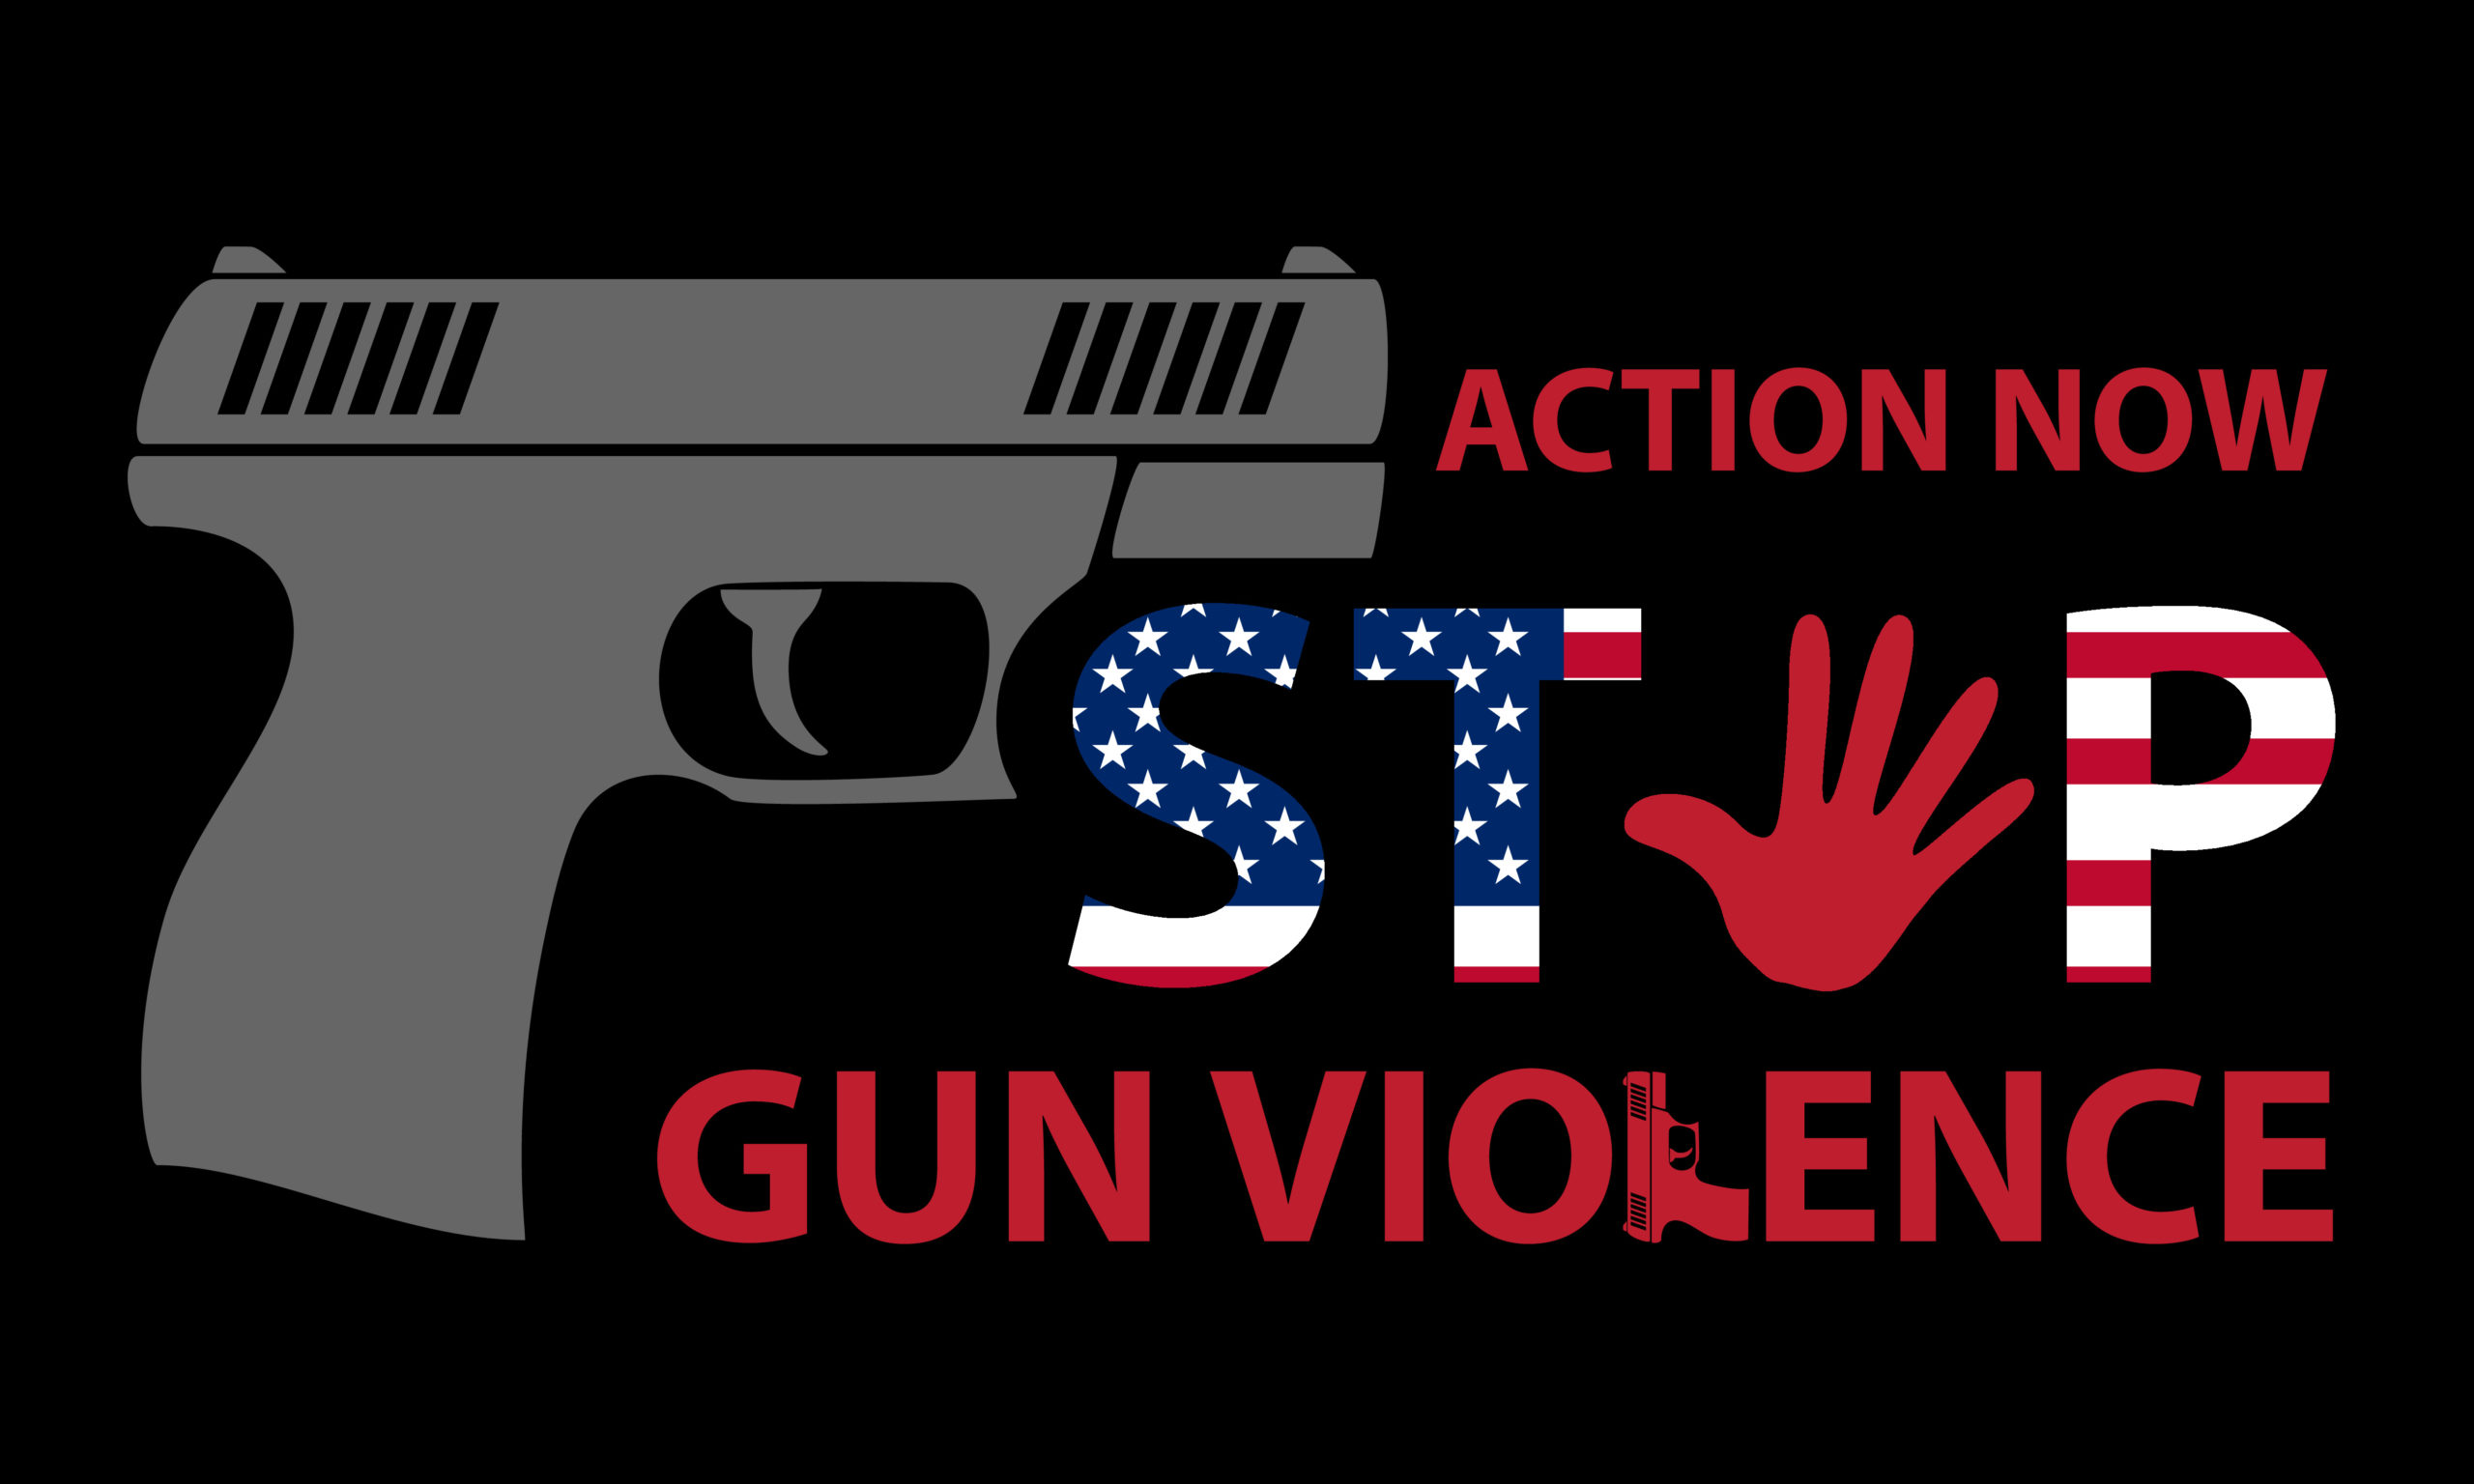 "Stop gun violence" with symbol of gun and American flag on black background